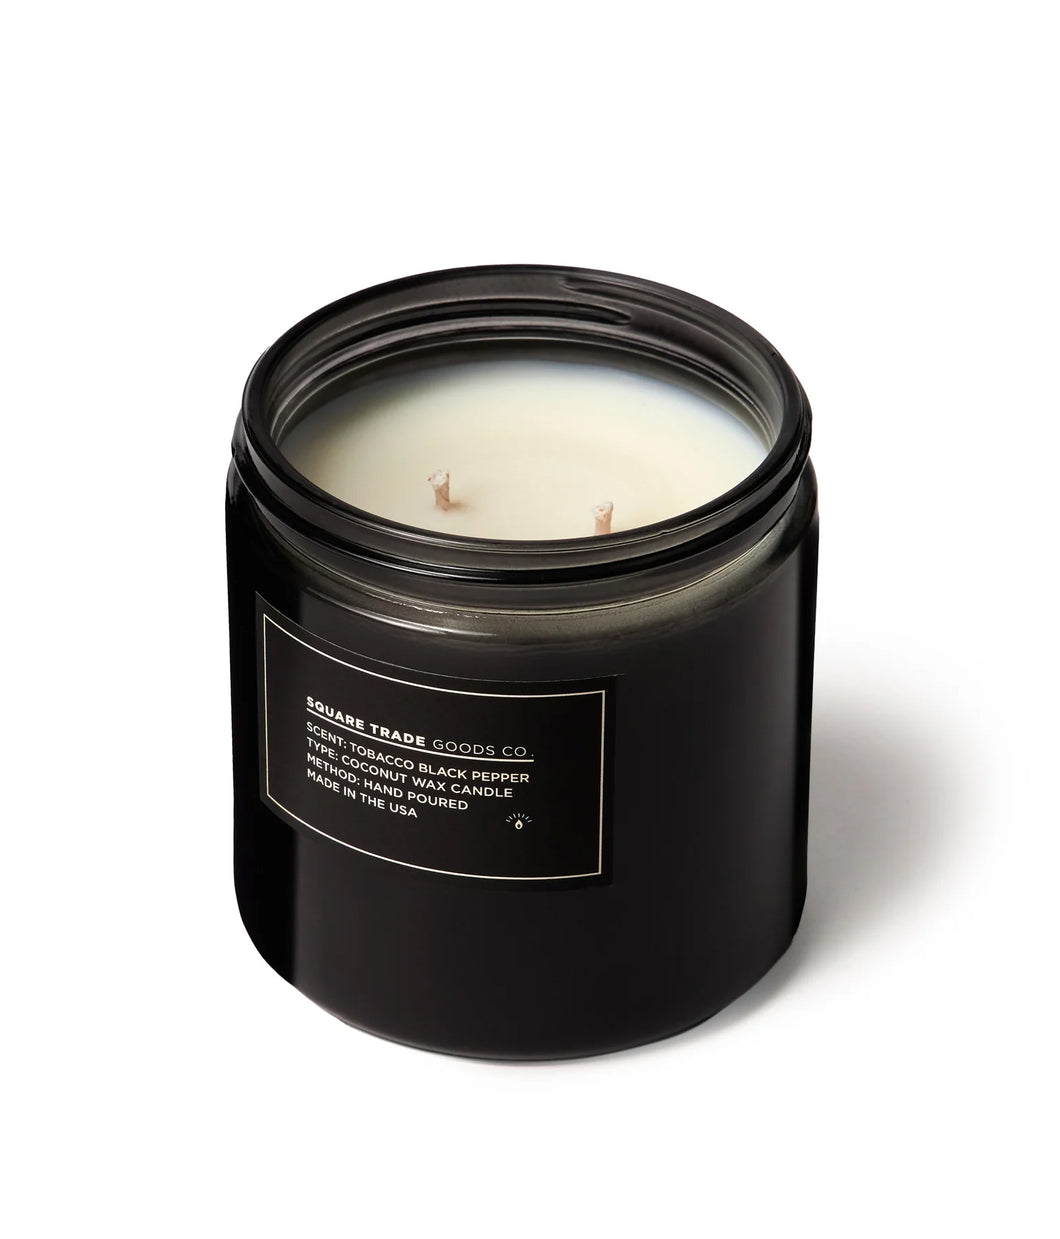 Square Trade Goods Co. - Tobacco Black Pepper - 16oz Double Wick Candle